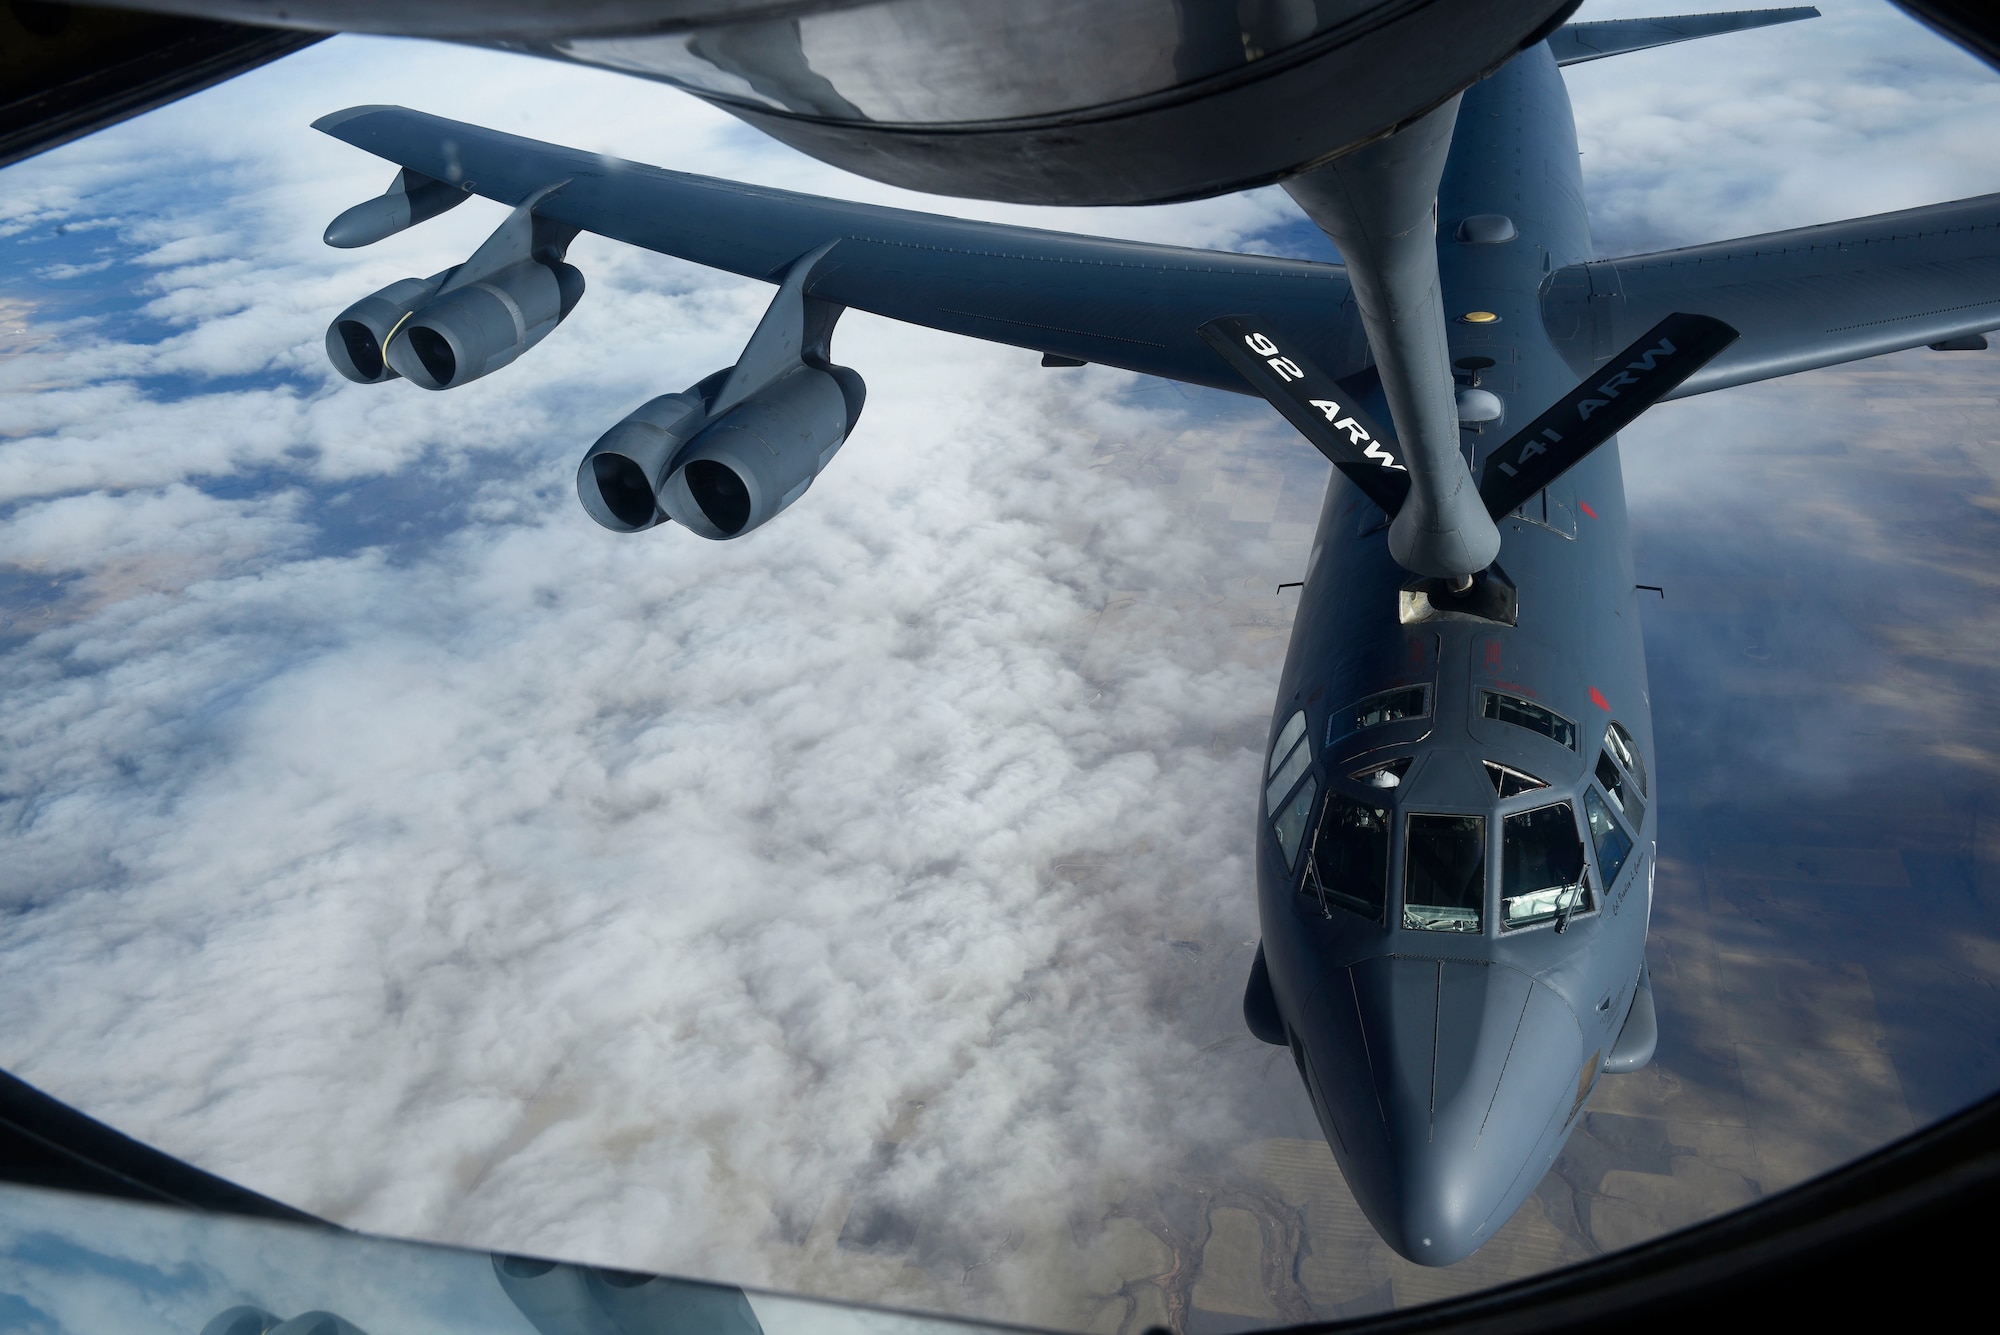 A KC-135 Stratotanker performs a refueling connection with a B-52 Stratofortress during Exercise Global Thunder 2019 over the U.S. Northwestern Region, November 2018. Global Thunder is a U.S. Strategic Command exercise designed to ensure an efficient mission response by testing Airmen's ability to execute command, control and operational procedures during simulated combat scenarios. (U.S. Air Force photo/Airman 1st Class Lawrence Sena)